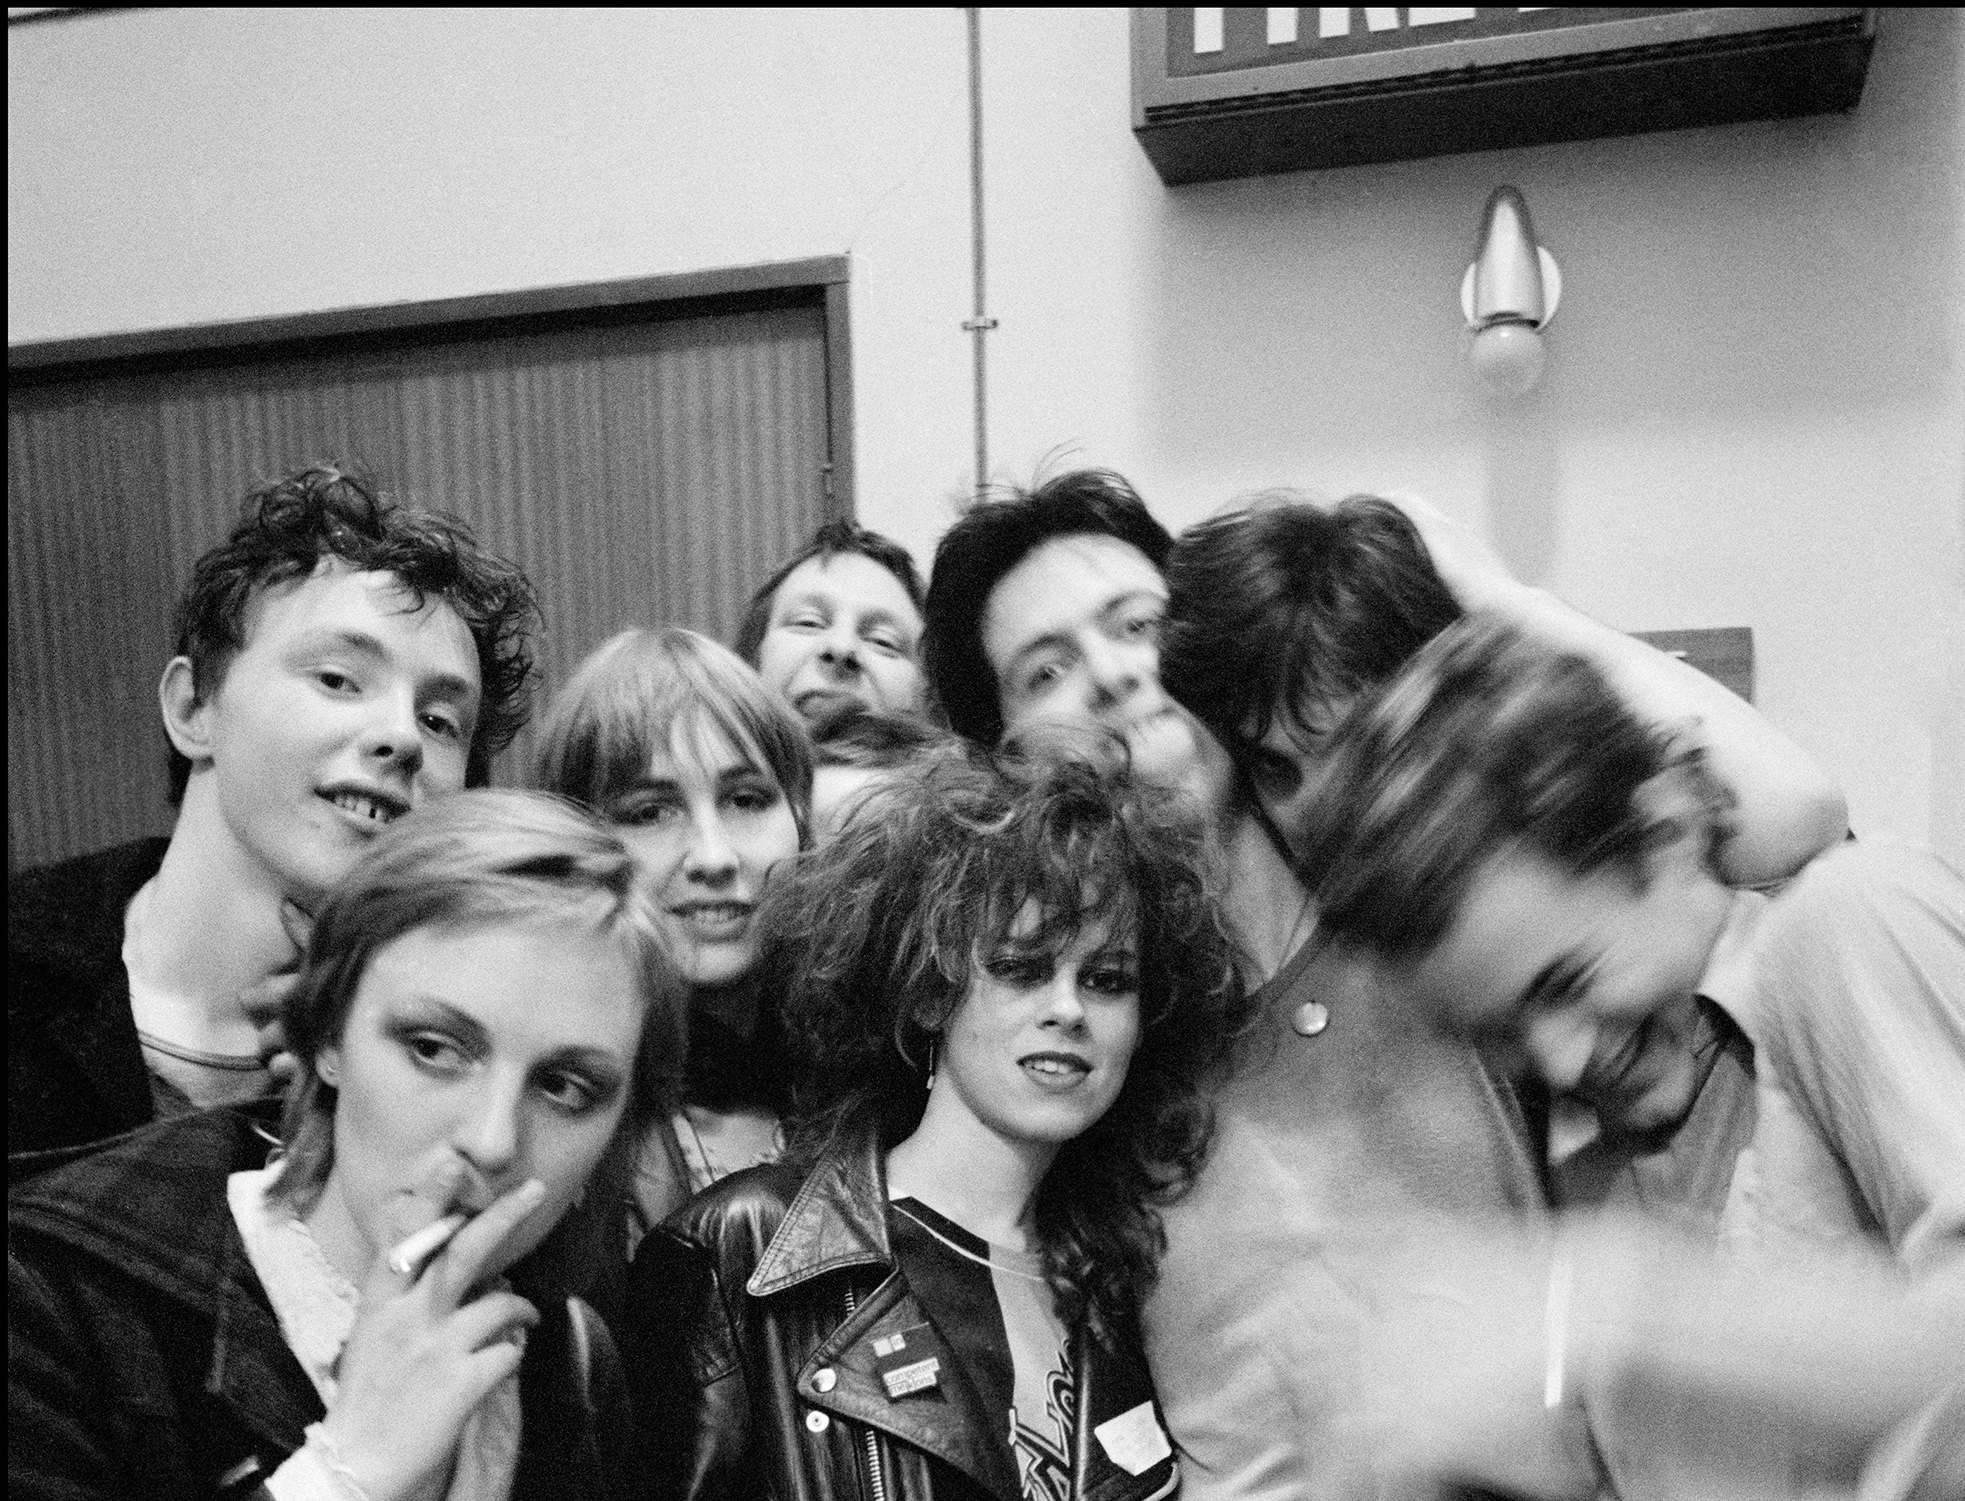 A black and white photograph of Mekons, a group of young white people in 1979 justling with each other, drinking and smoking